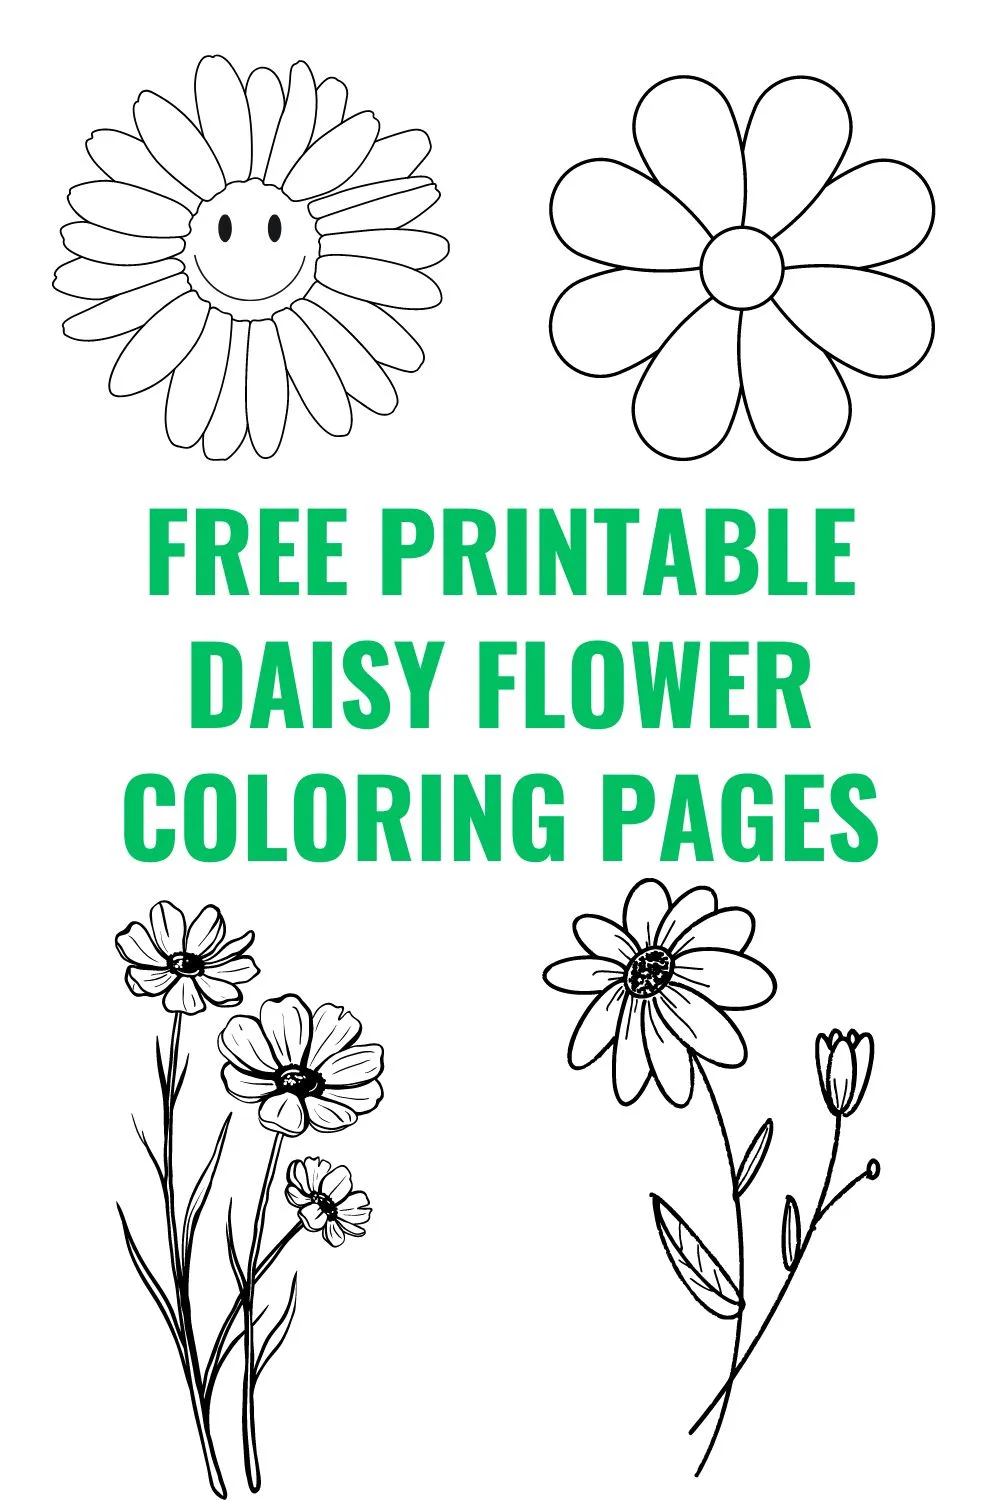 free printable daisy flower coloring pages.